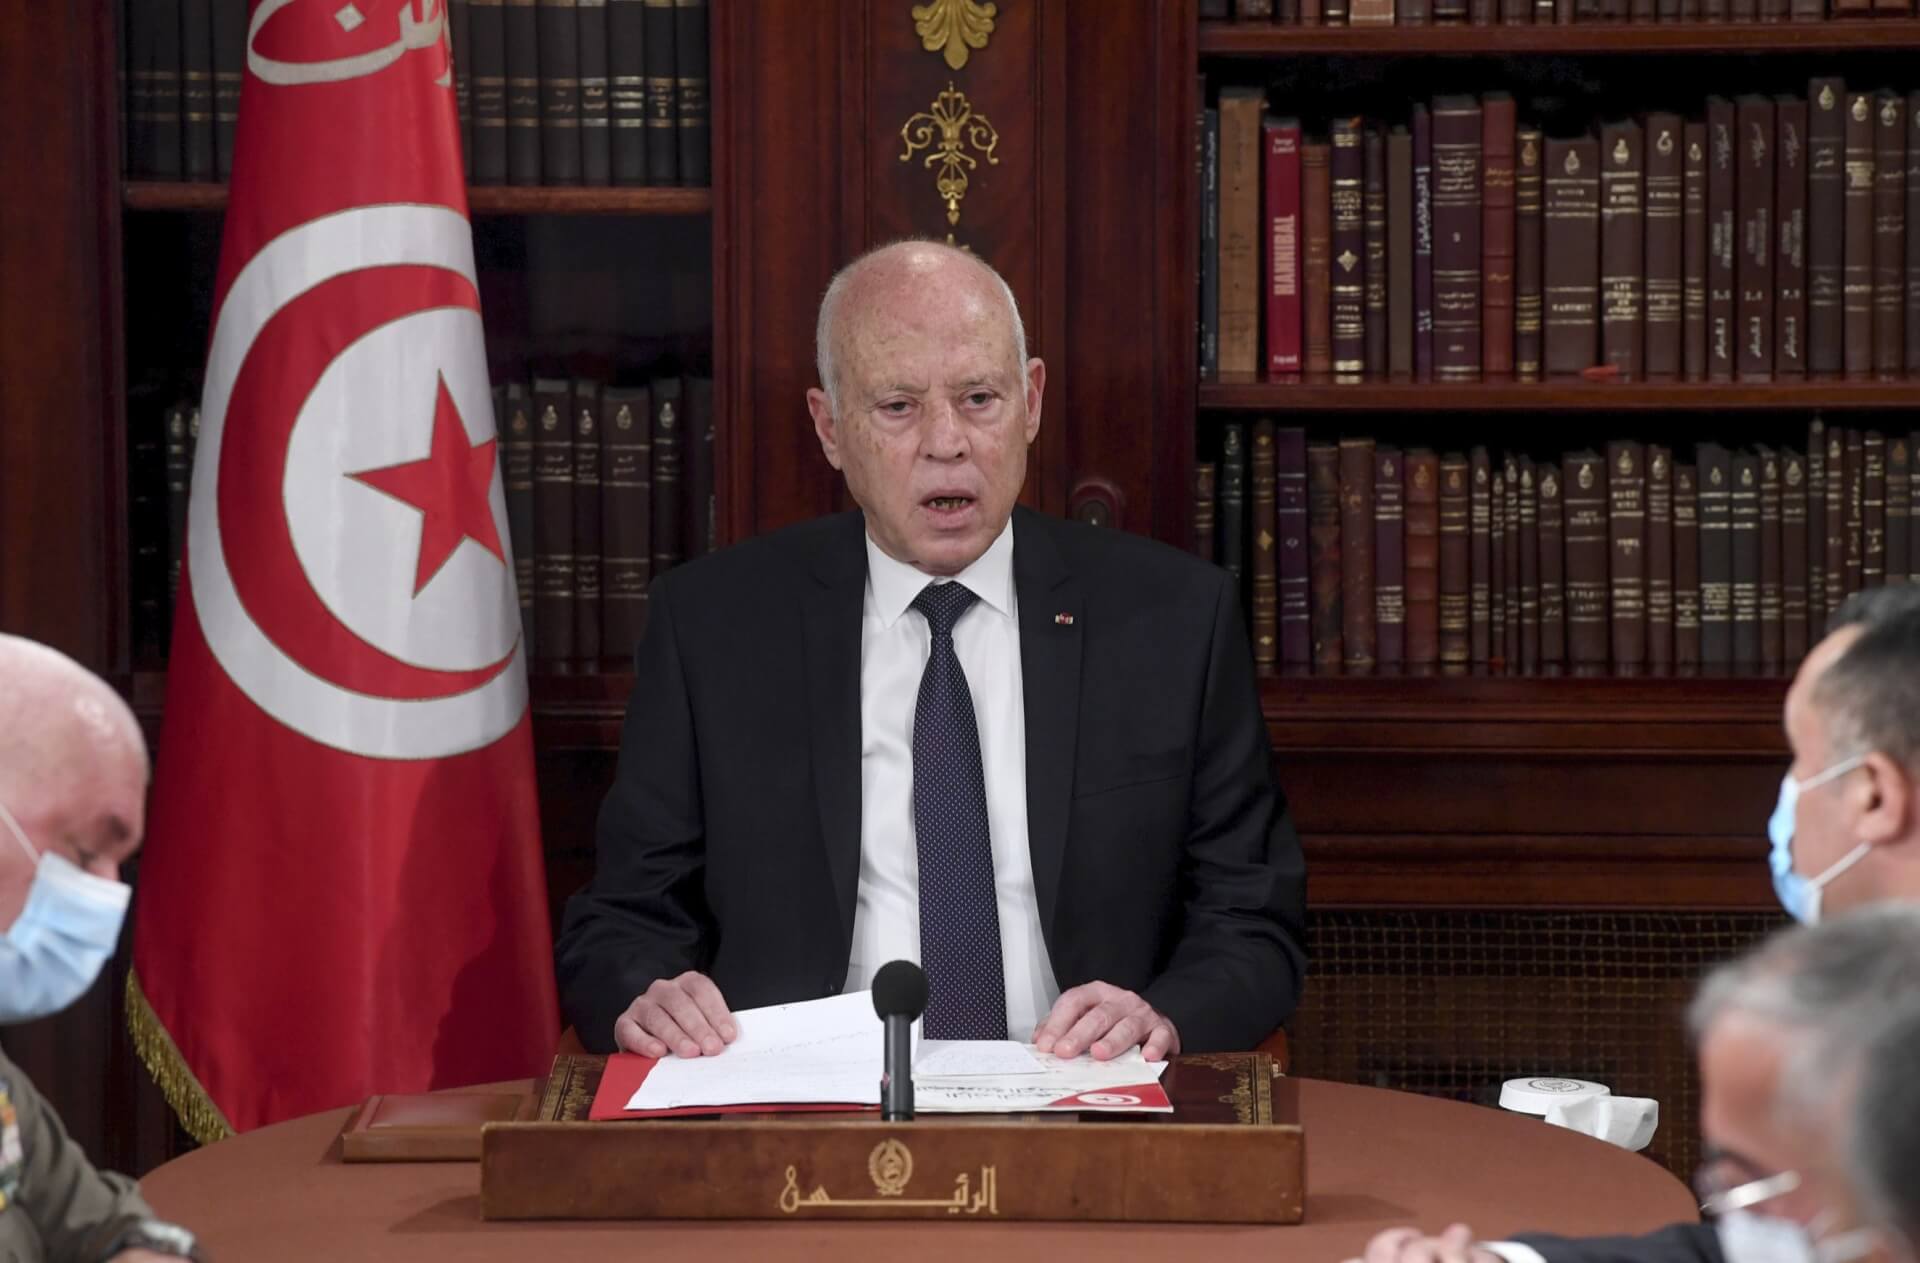 Tunisian President Saied Preparing to Amend Constitution, Plans to Appoint New Government